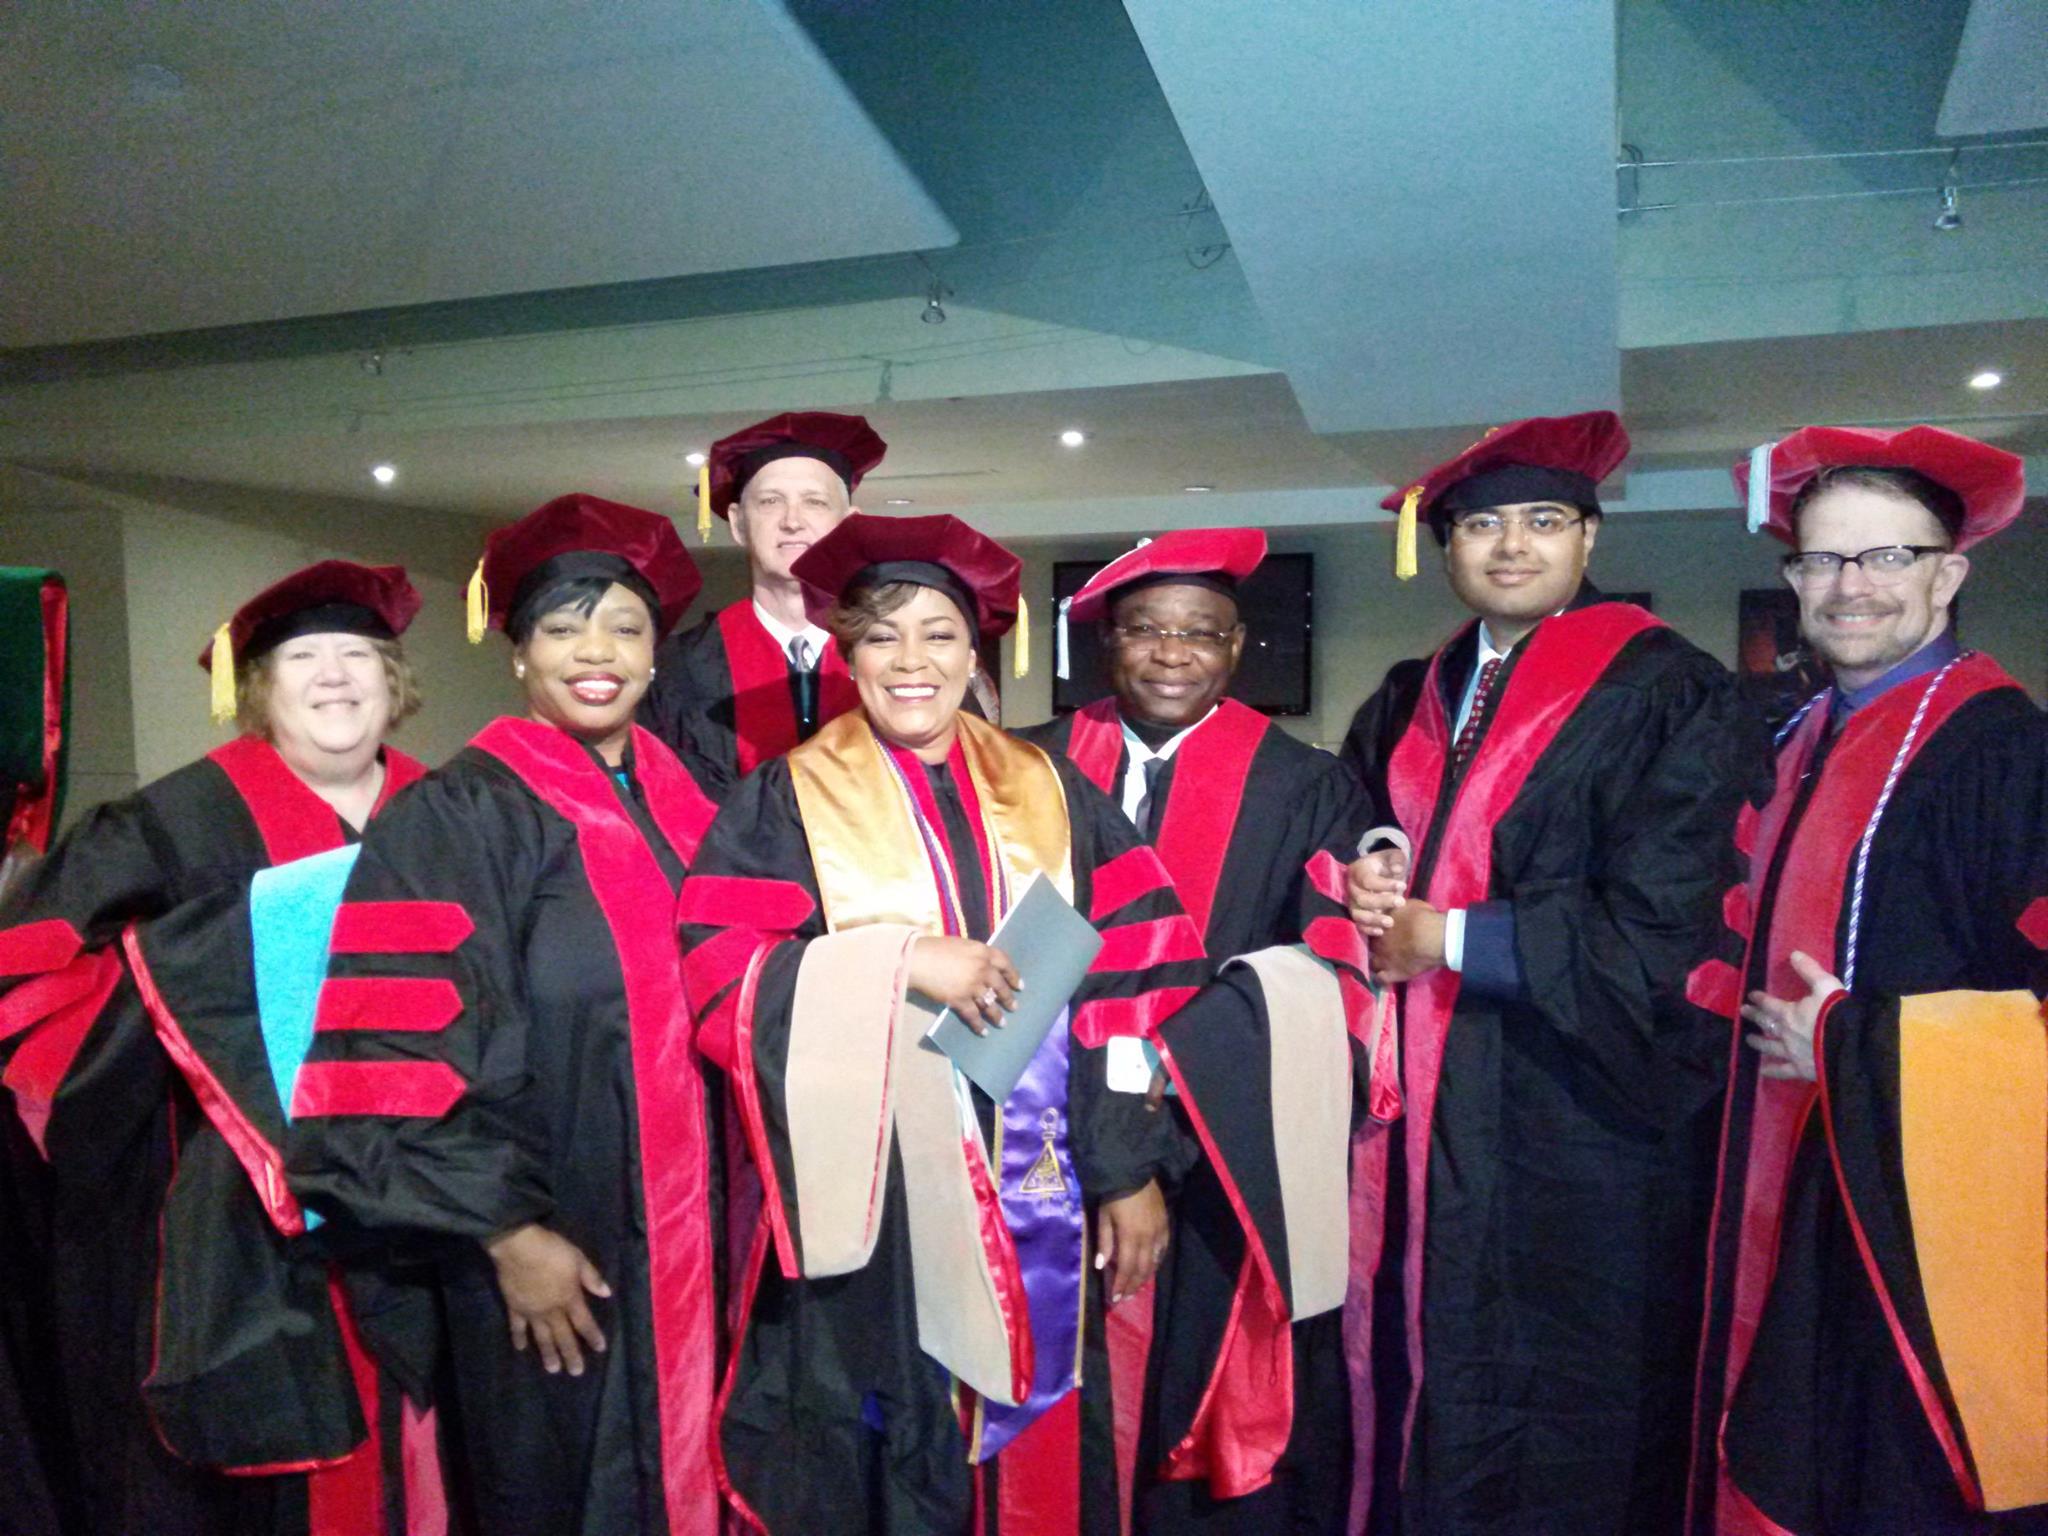 Dr. Crystal Davis wearing a graduation gown